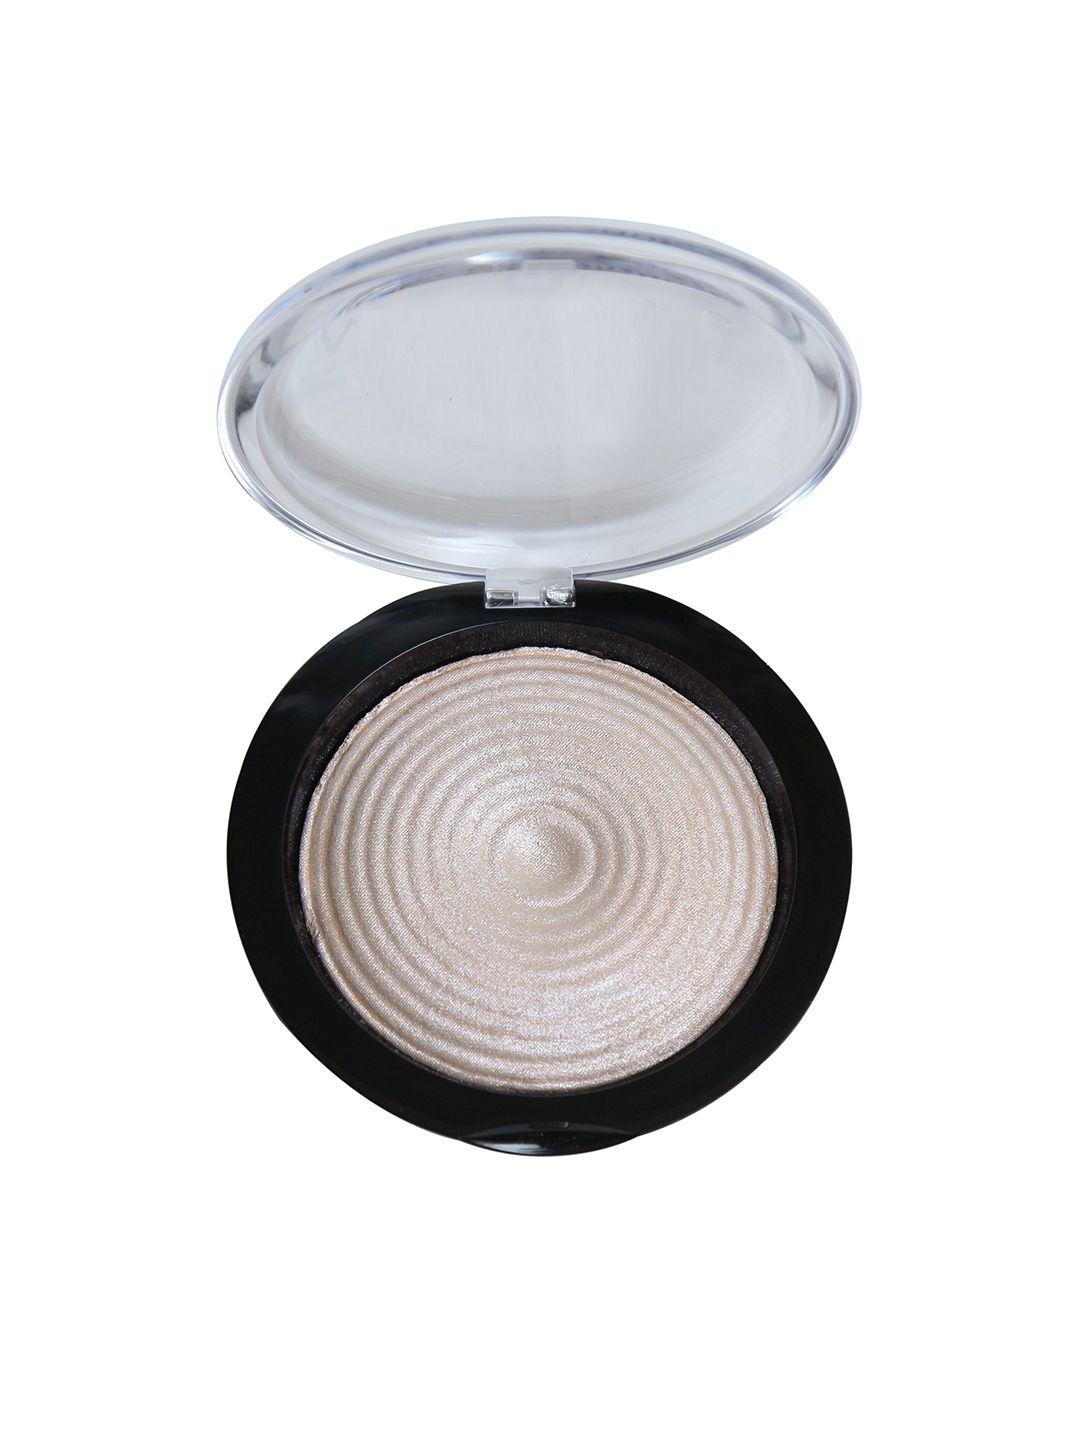 miss-claire-04-baked-highlighter-8-g